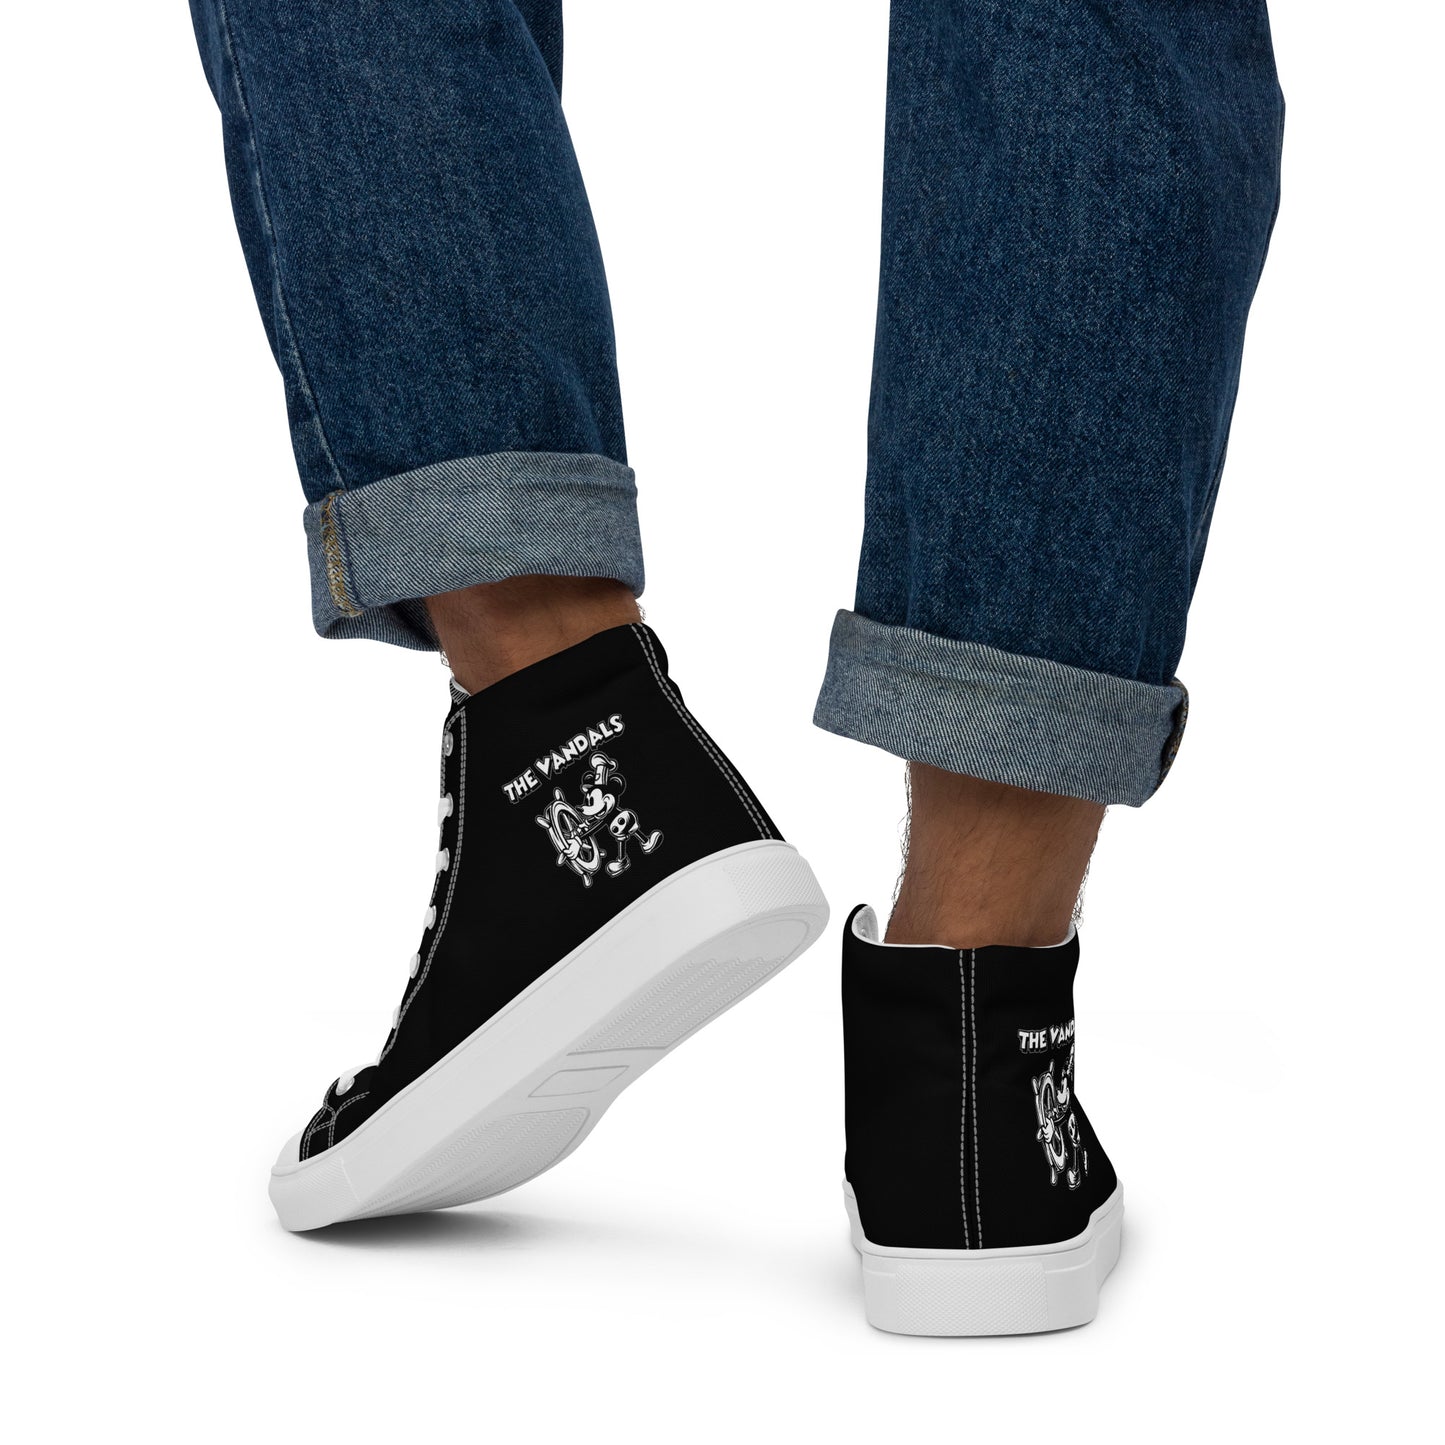 Vandals Mickey Mouse Men’s high top canvas shoes